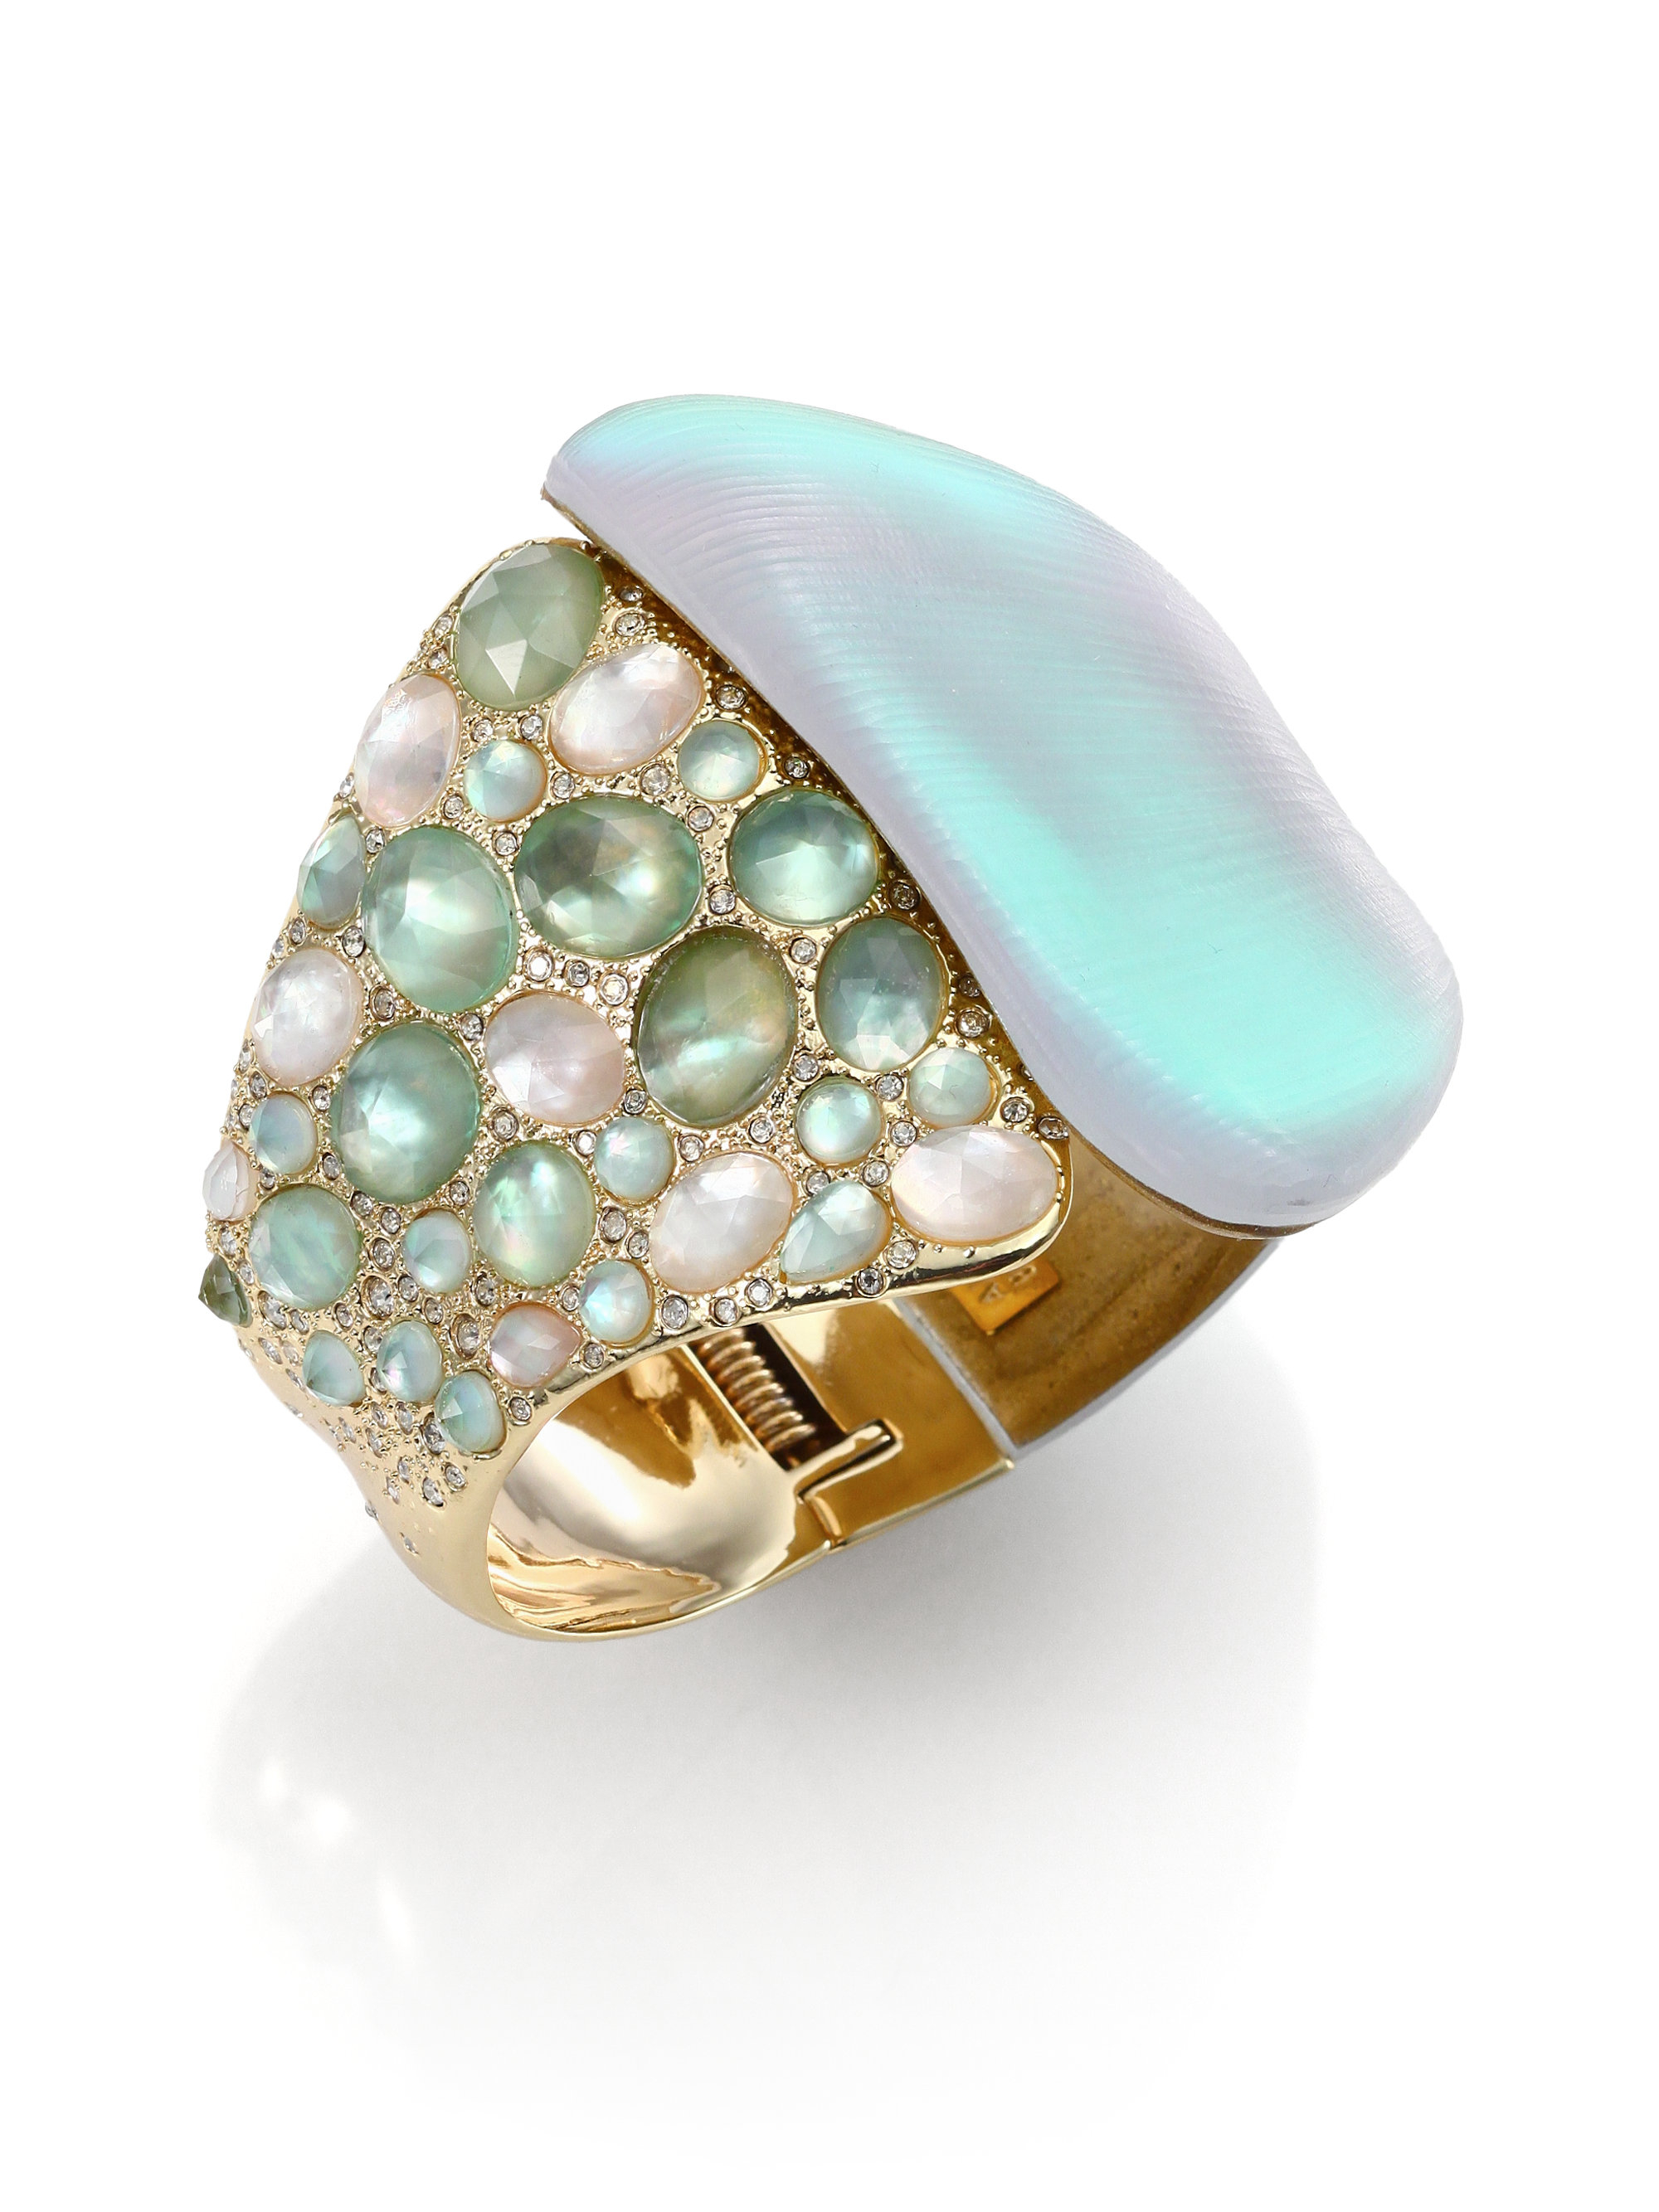 Alexis Bittar Vert D'Eau Lucite, Mother-Of-Pearl & Crystal Statement ...